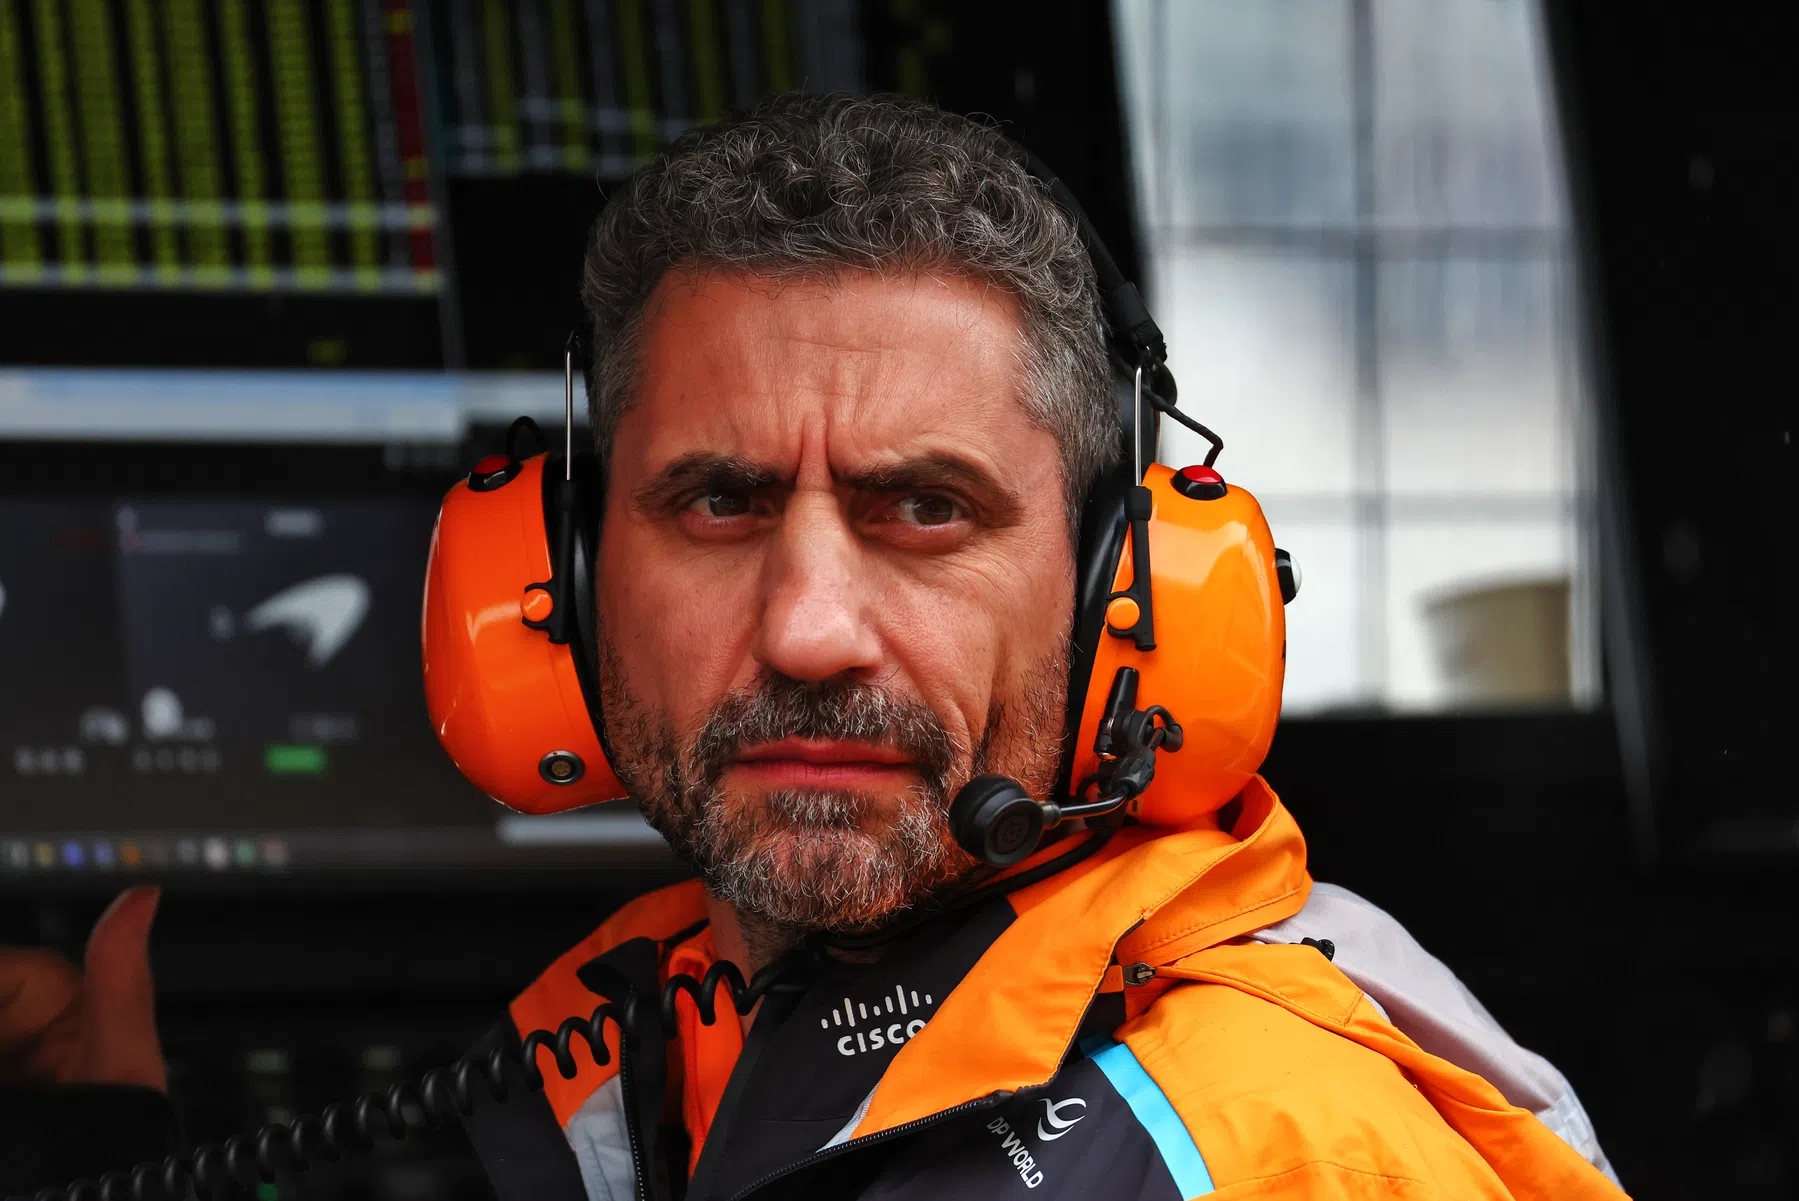 Andrea Stella And McLaren angry at Verstappen for crash